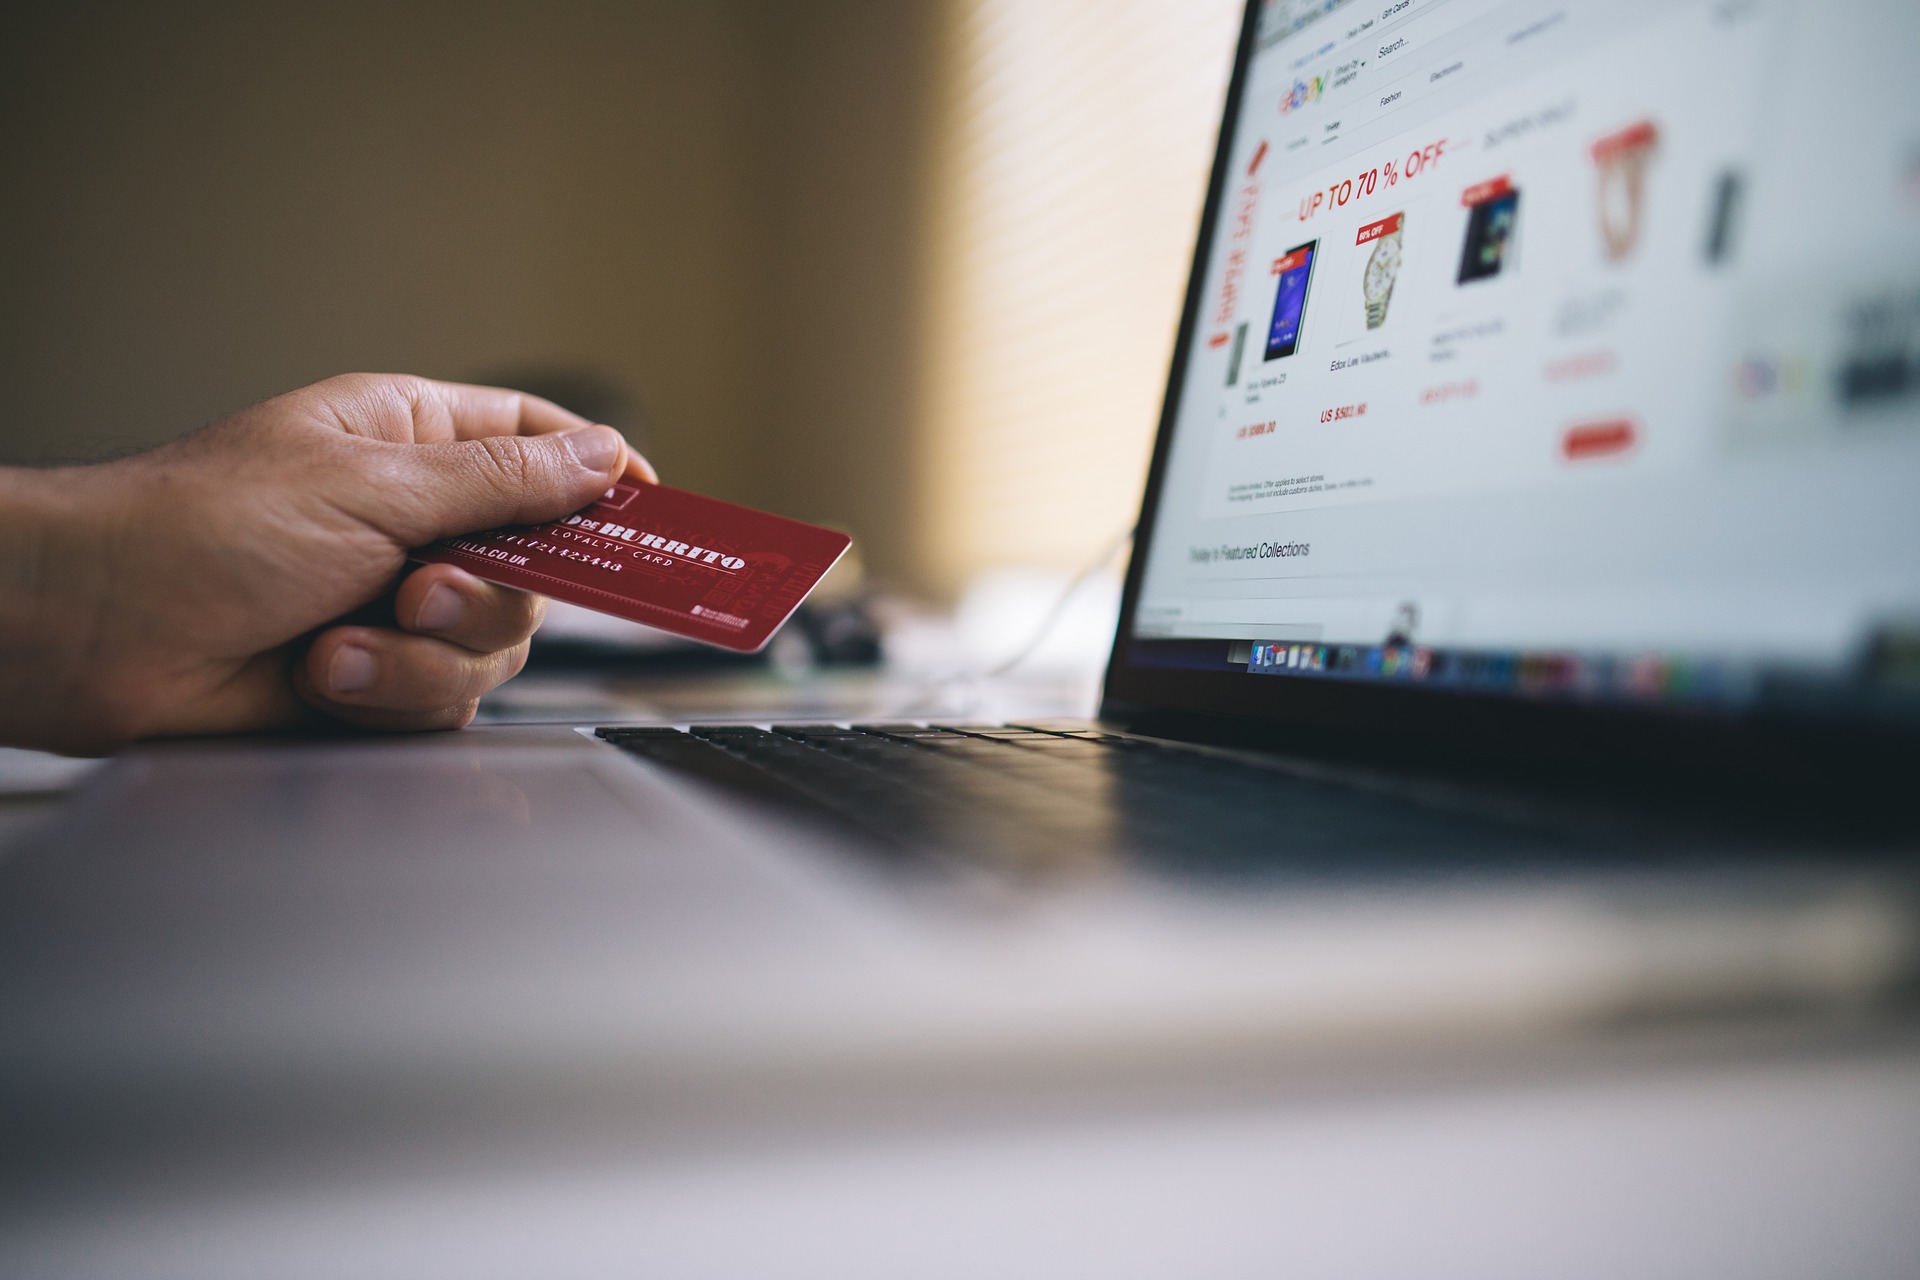 Essential Tips for Maintaining Your E-Commerce Site